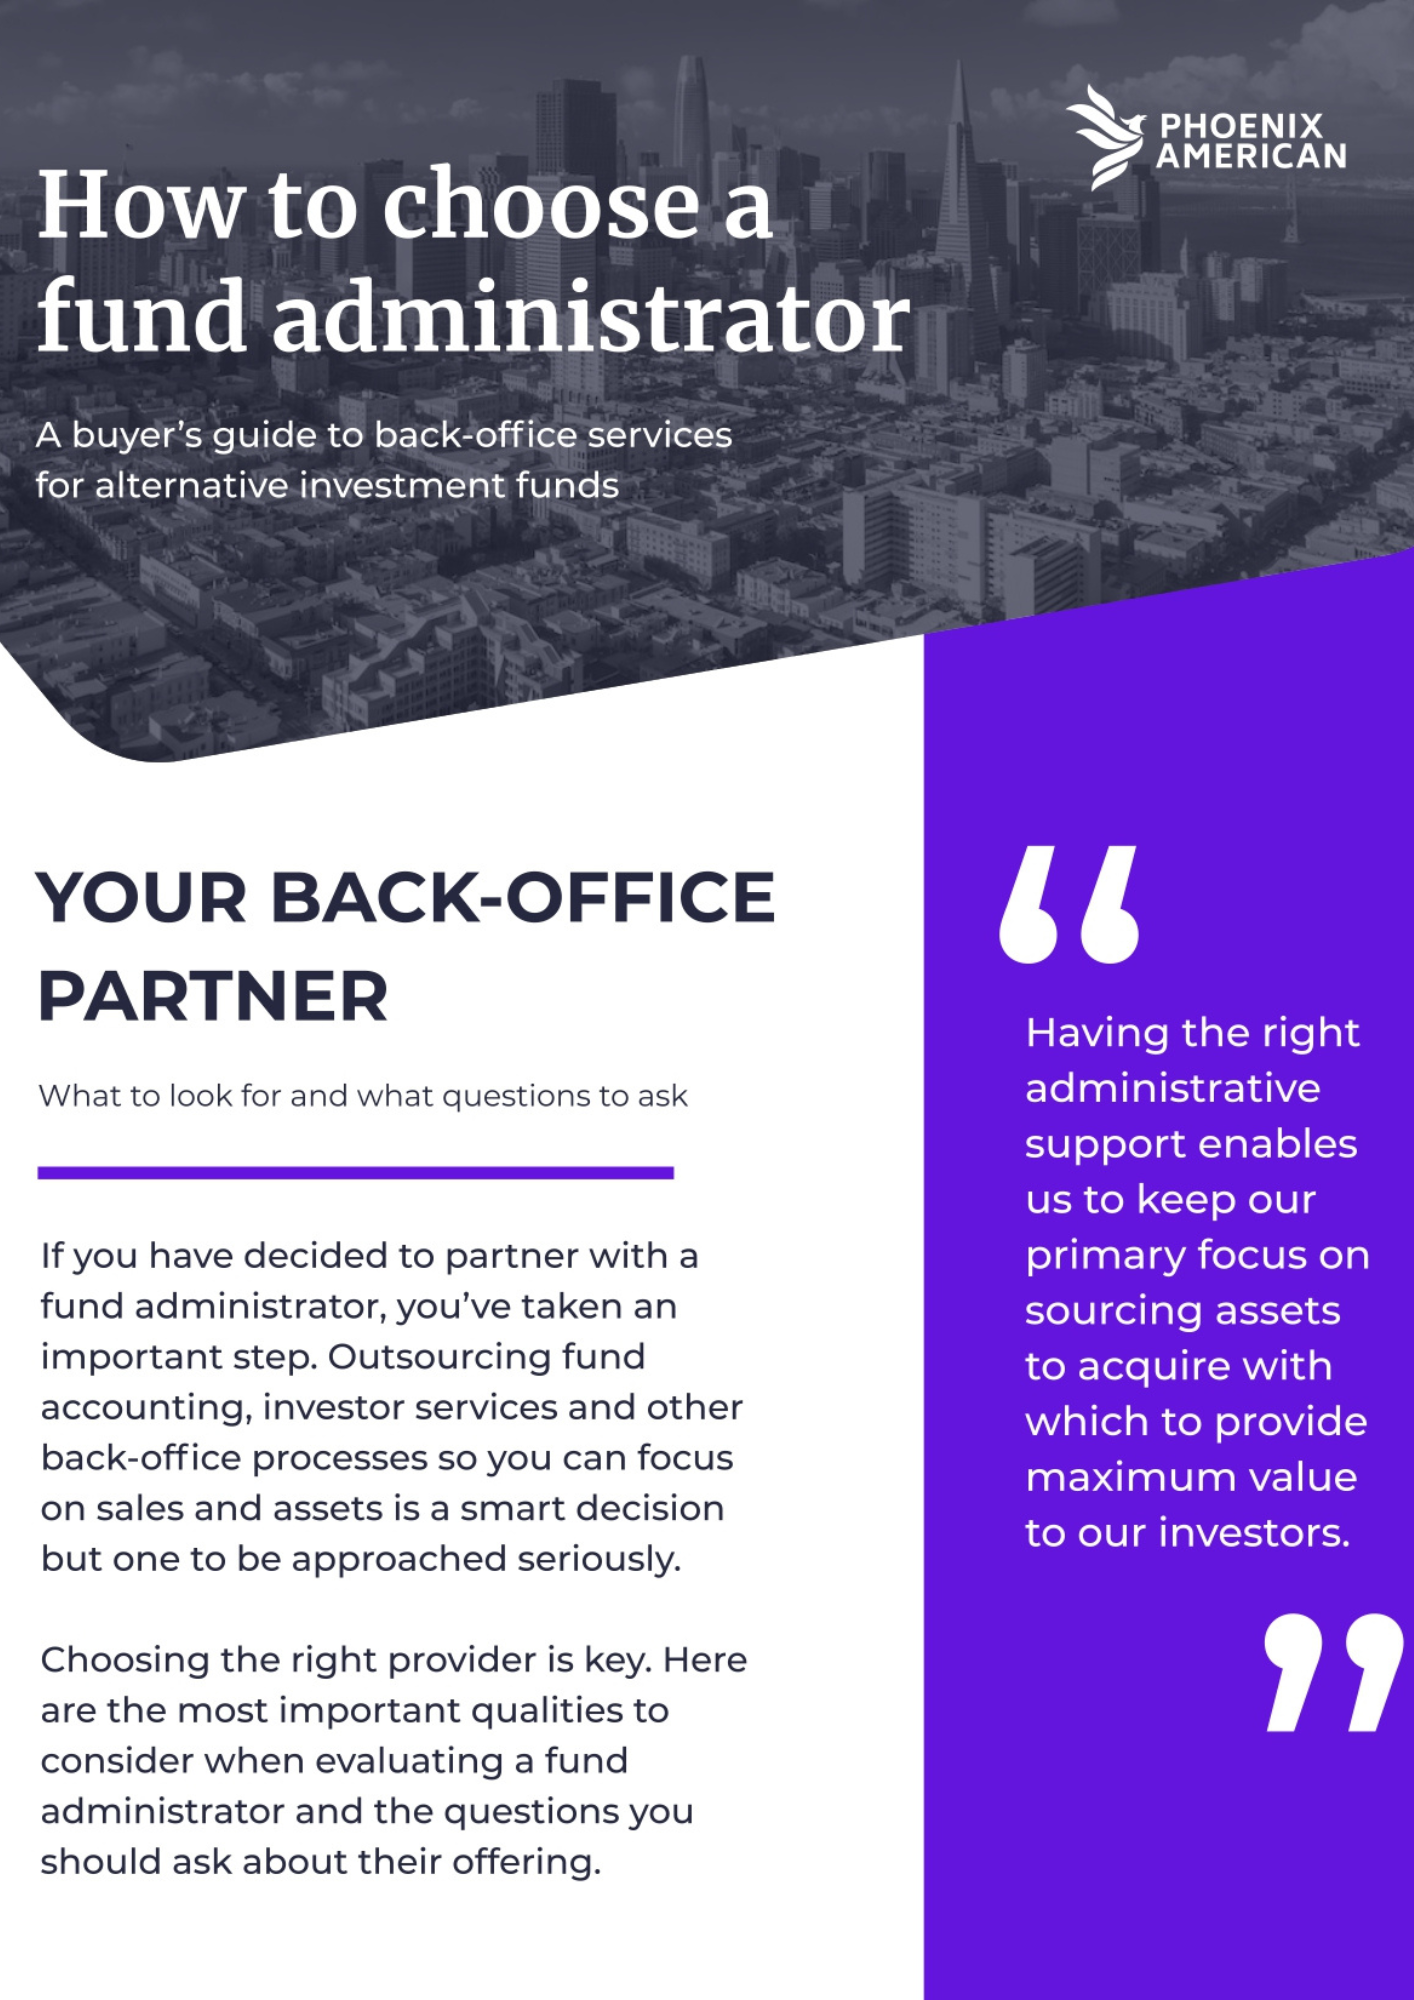 How to choose a fund administrator.